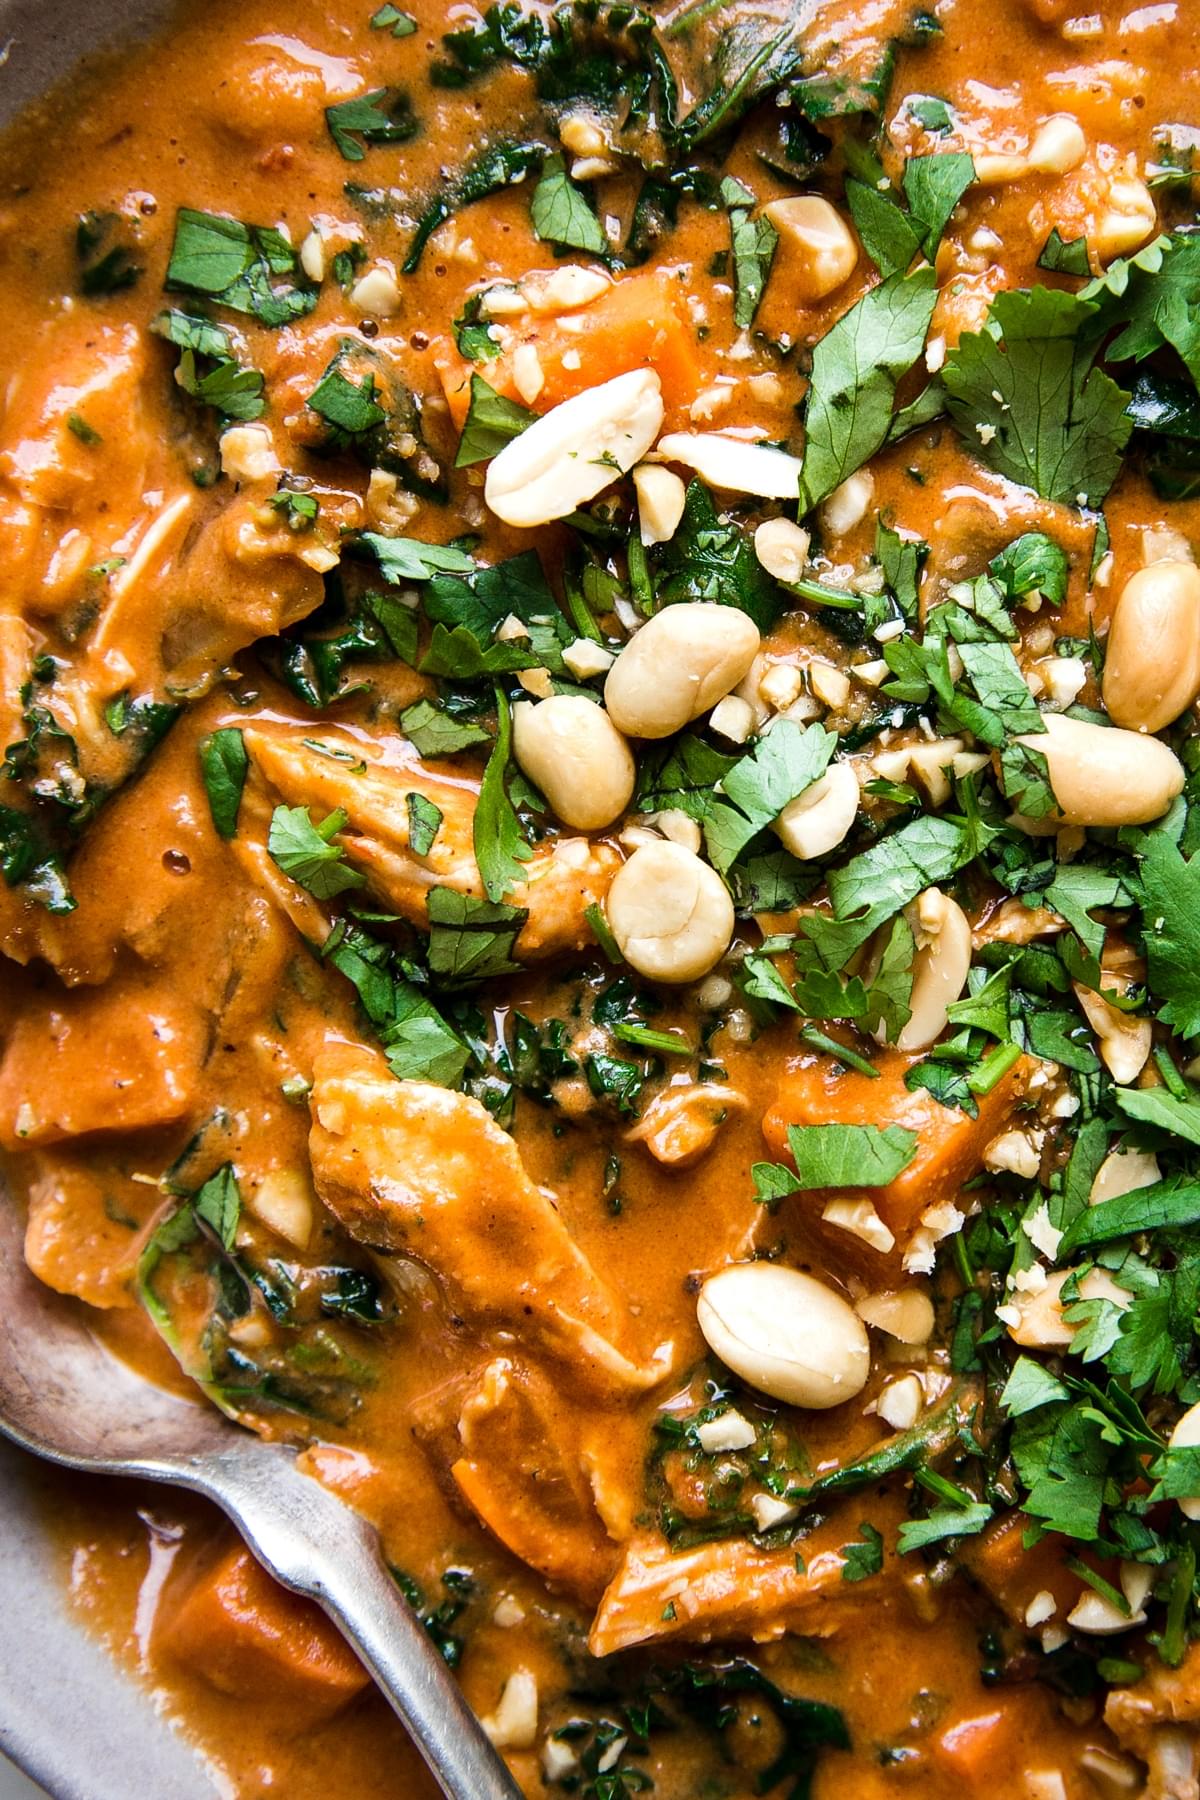 sweet and spicy peanut soup with chicken kale chickpeas and sweet potatoes garnished with cilantro and peanuts.